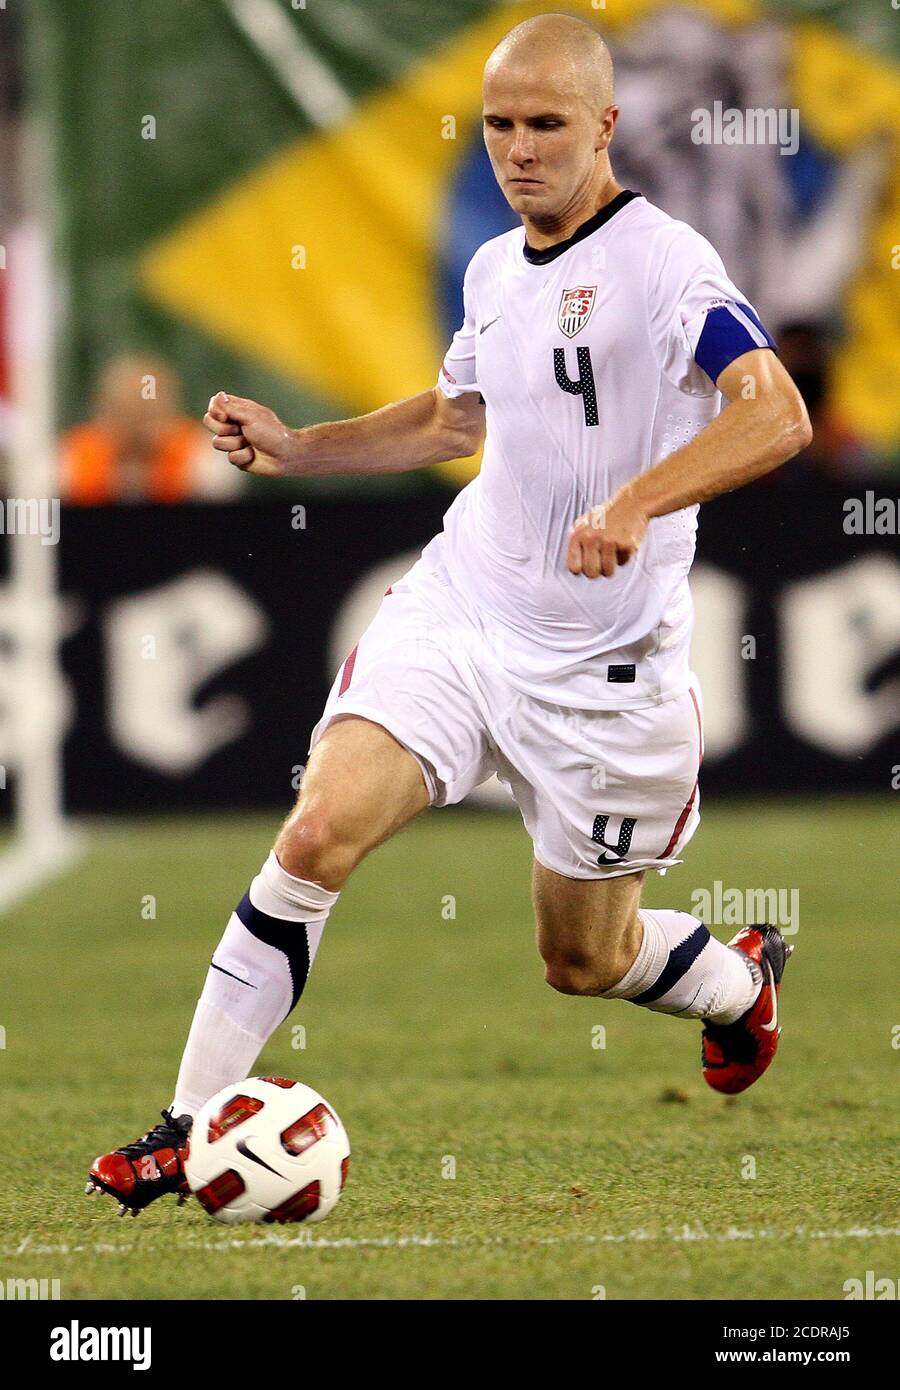 Michael Bradley #4 of the USA during an international friendly match against Brazil in Giants Stadium, on August 10 2010, in East Rutherford, New Jers Stock Photo